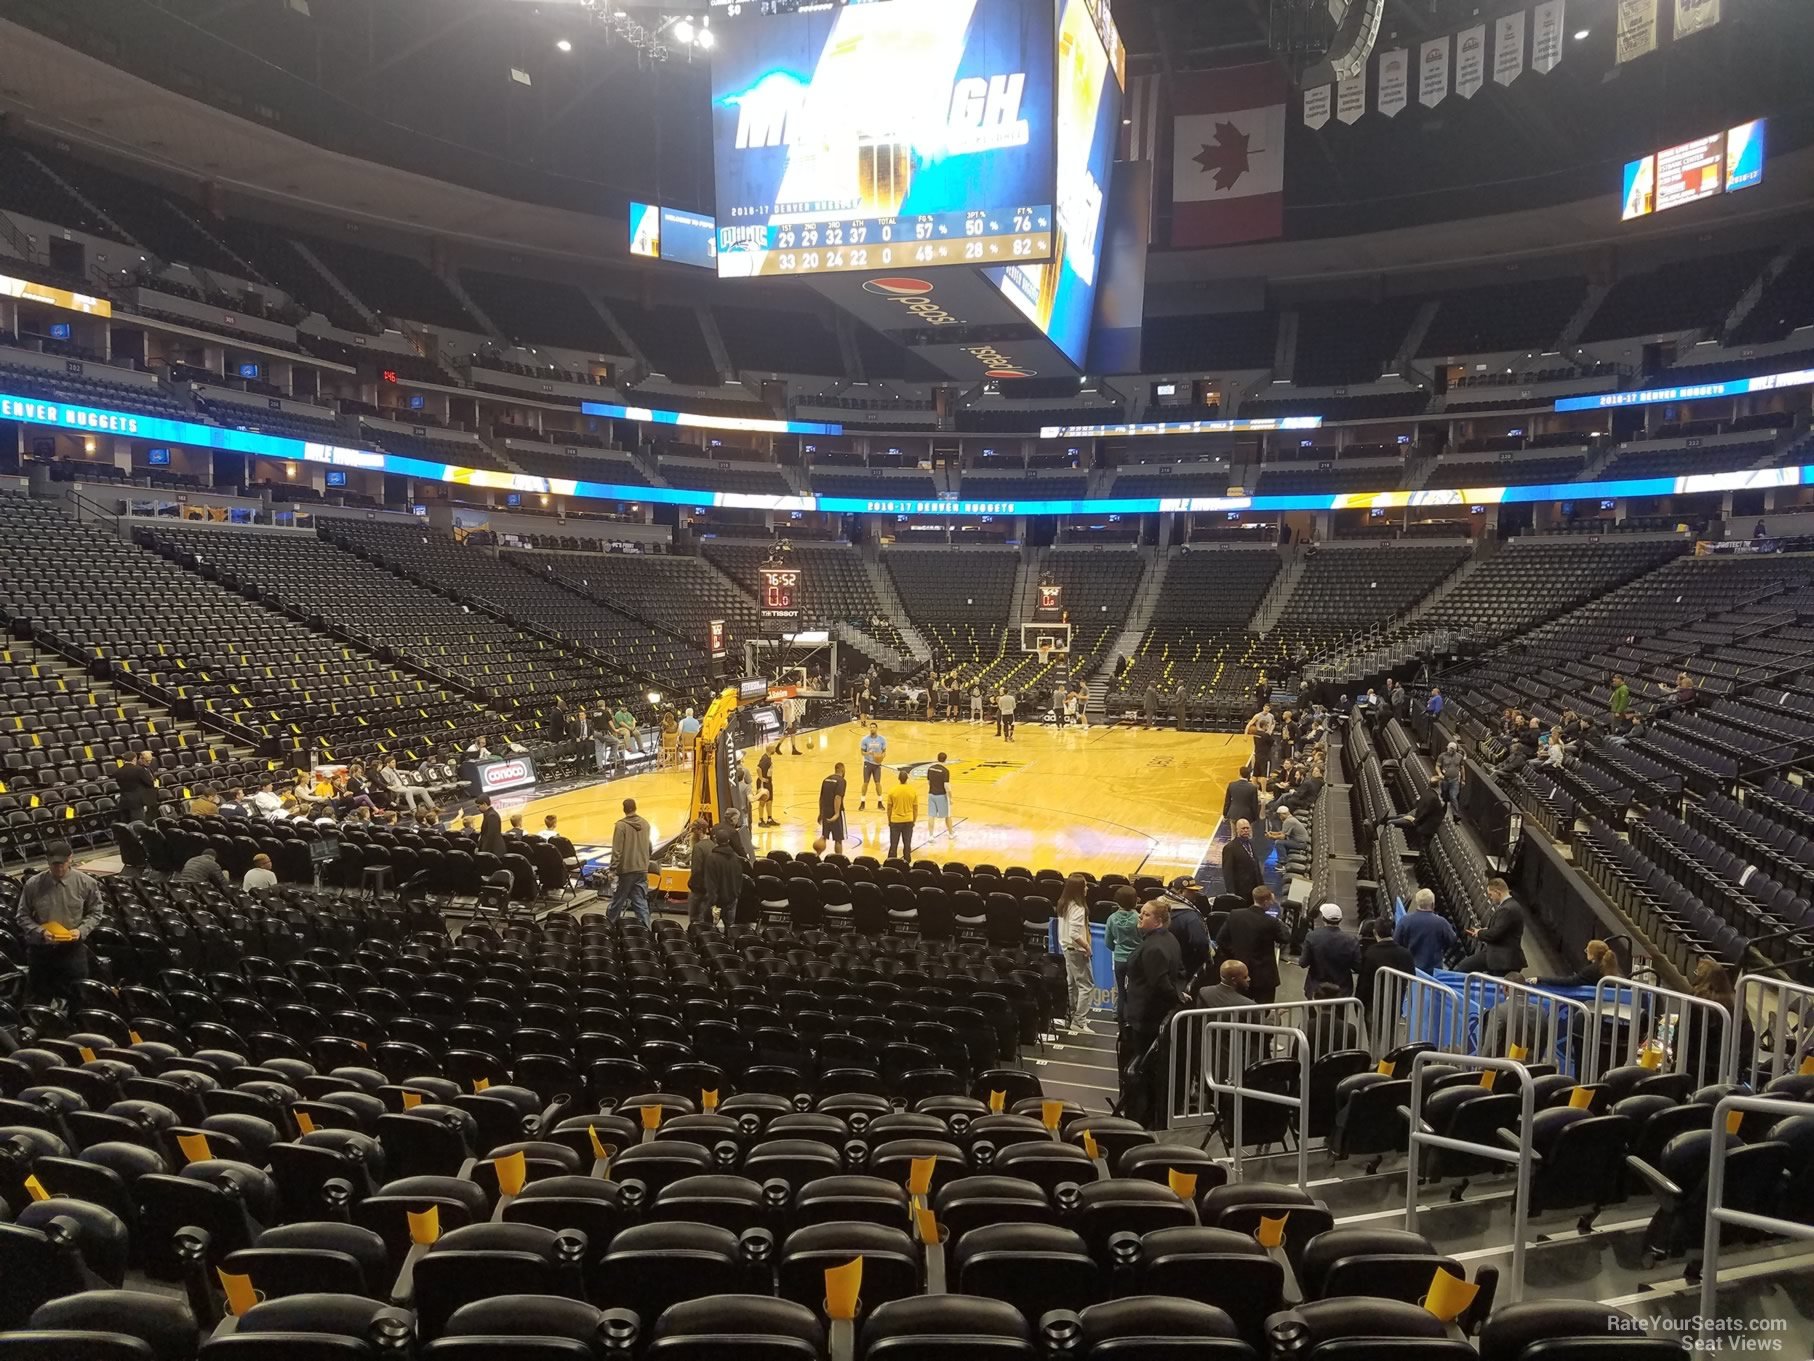 section 134, row 11 seat view  for basketball - ball arena